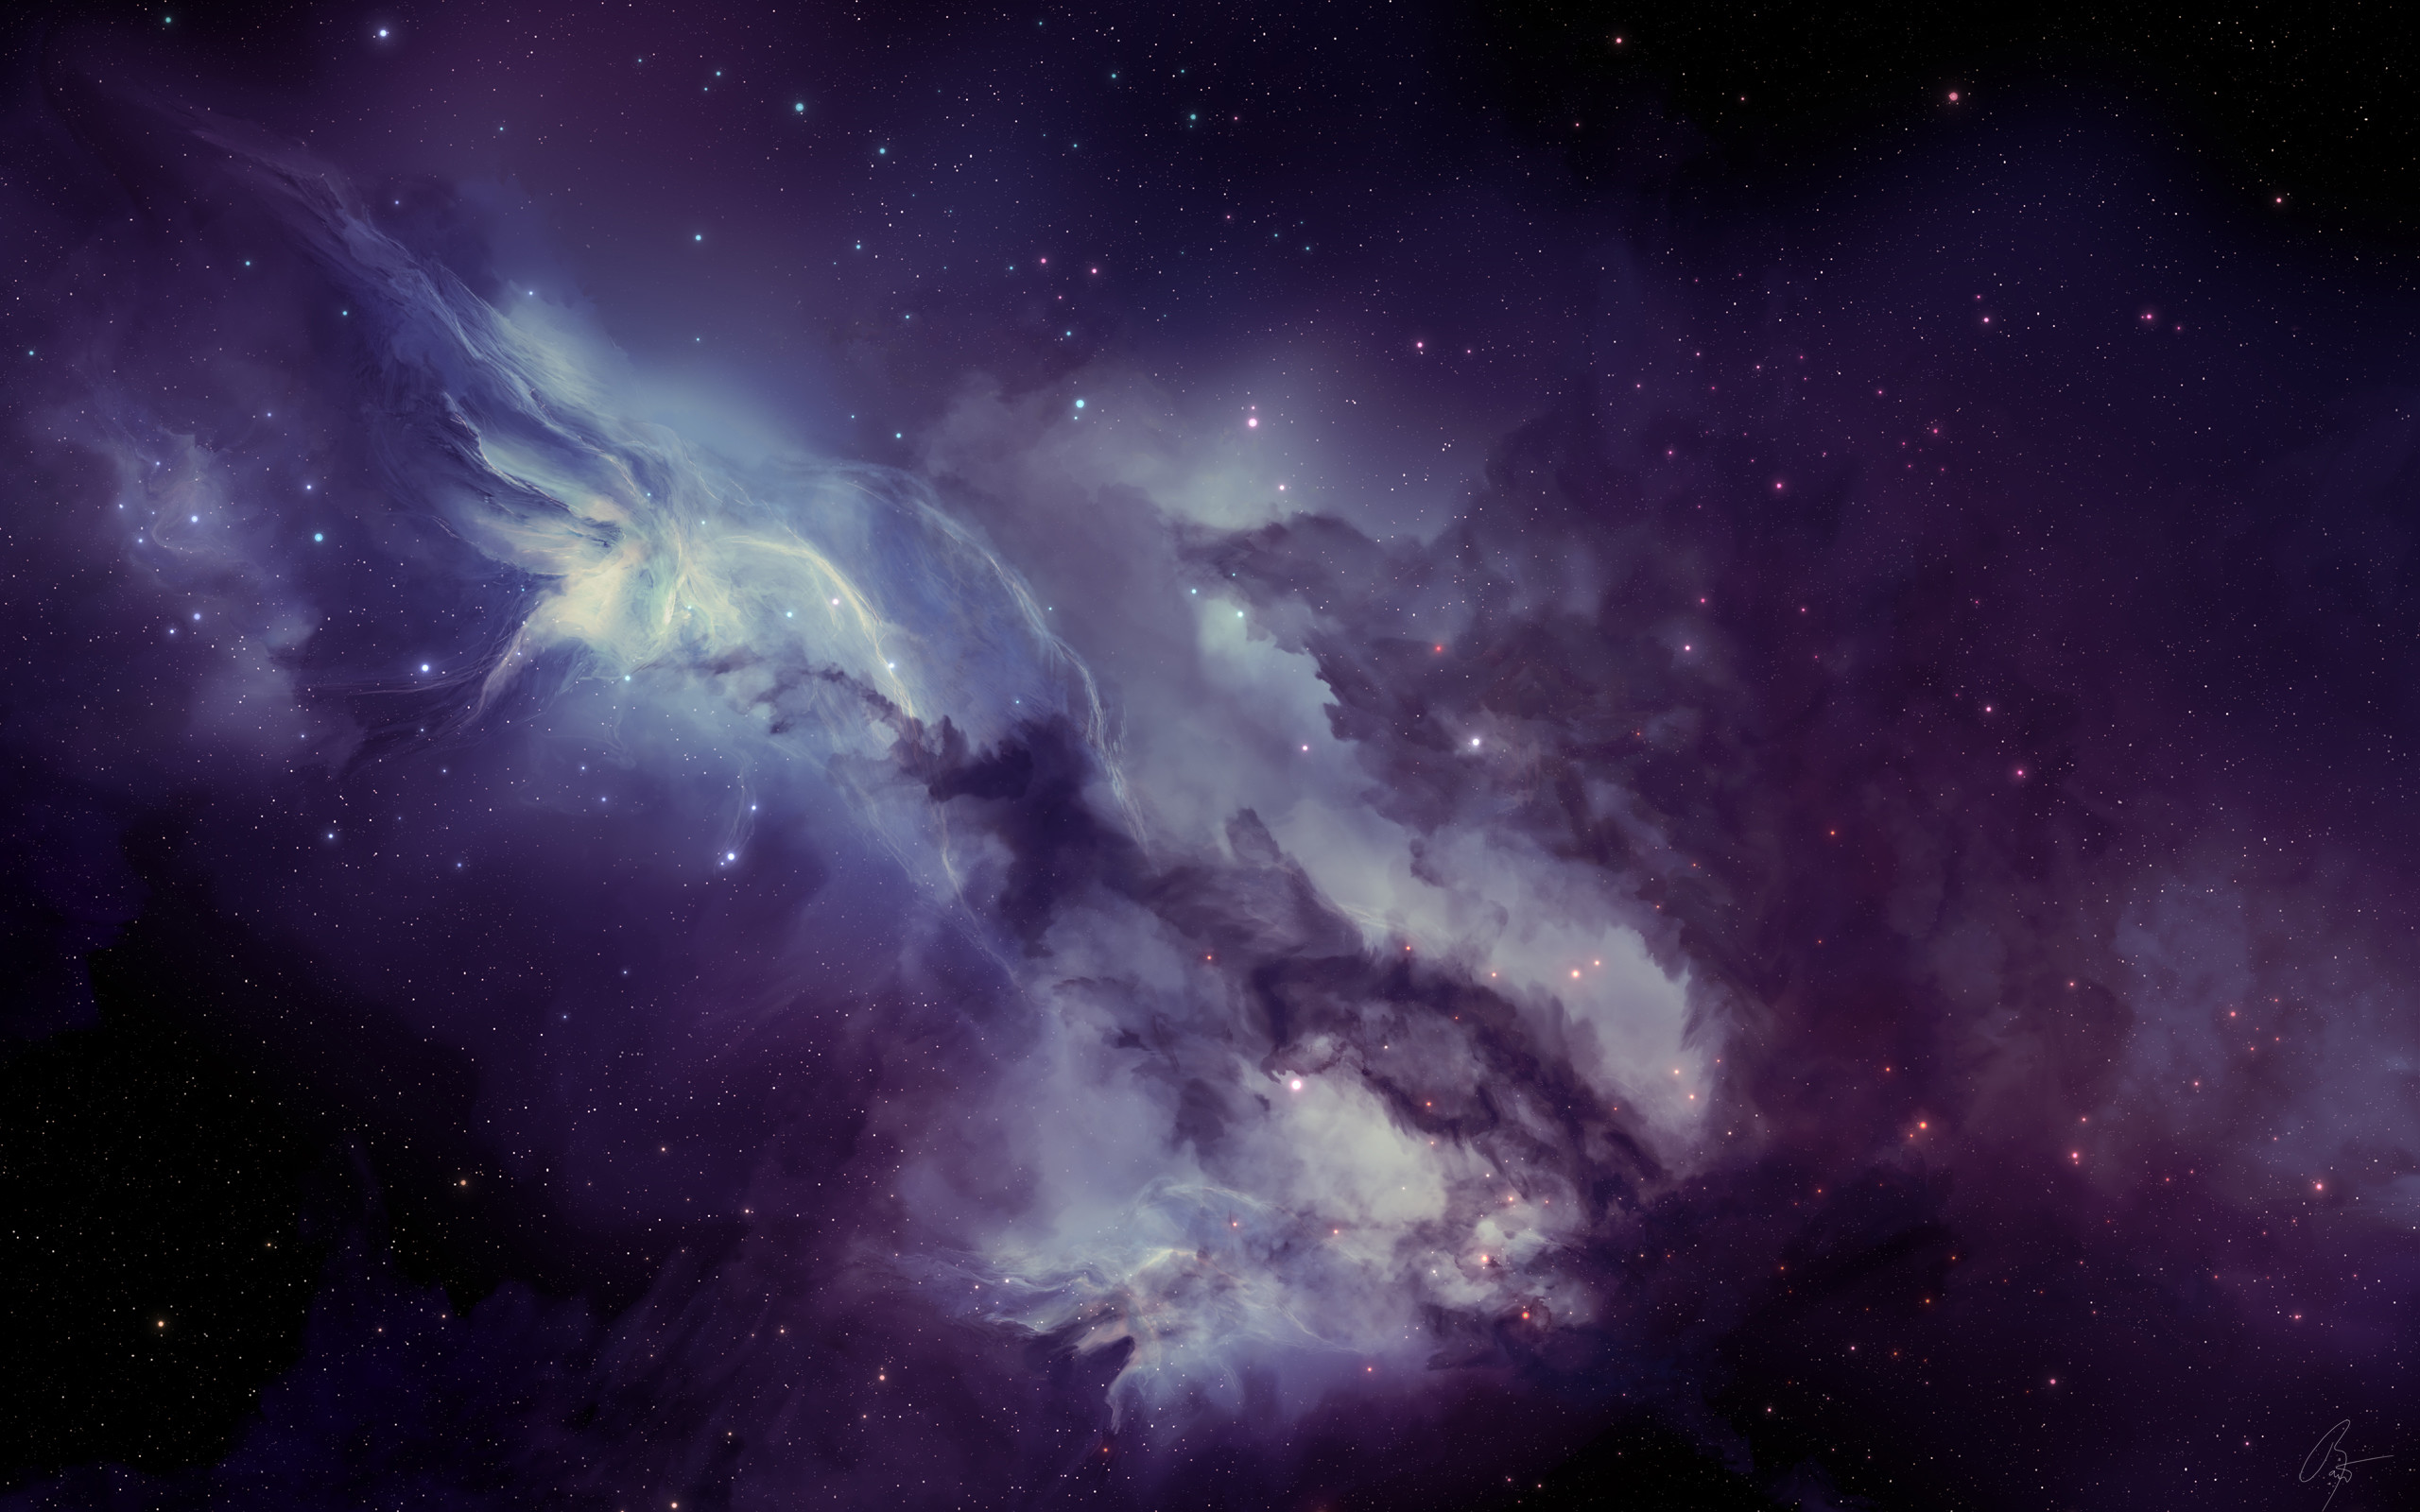 44+ Live Galaxy Wallpaper for PC